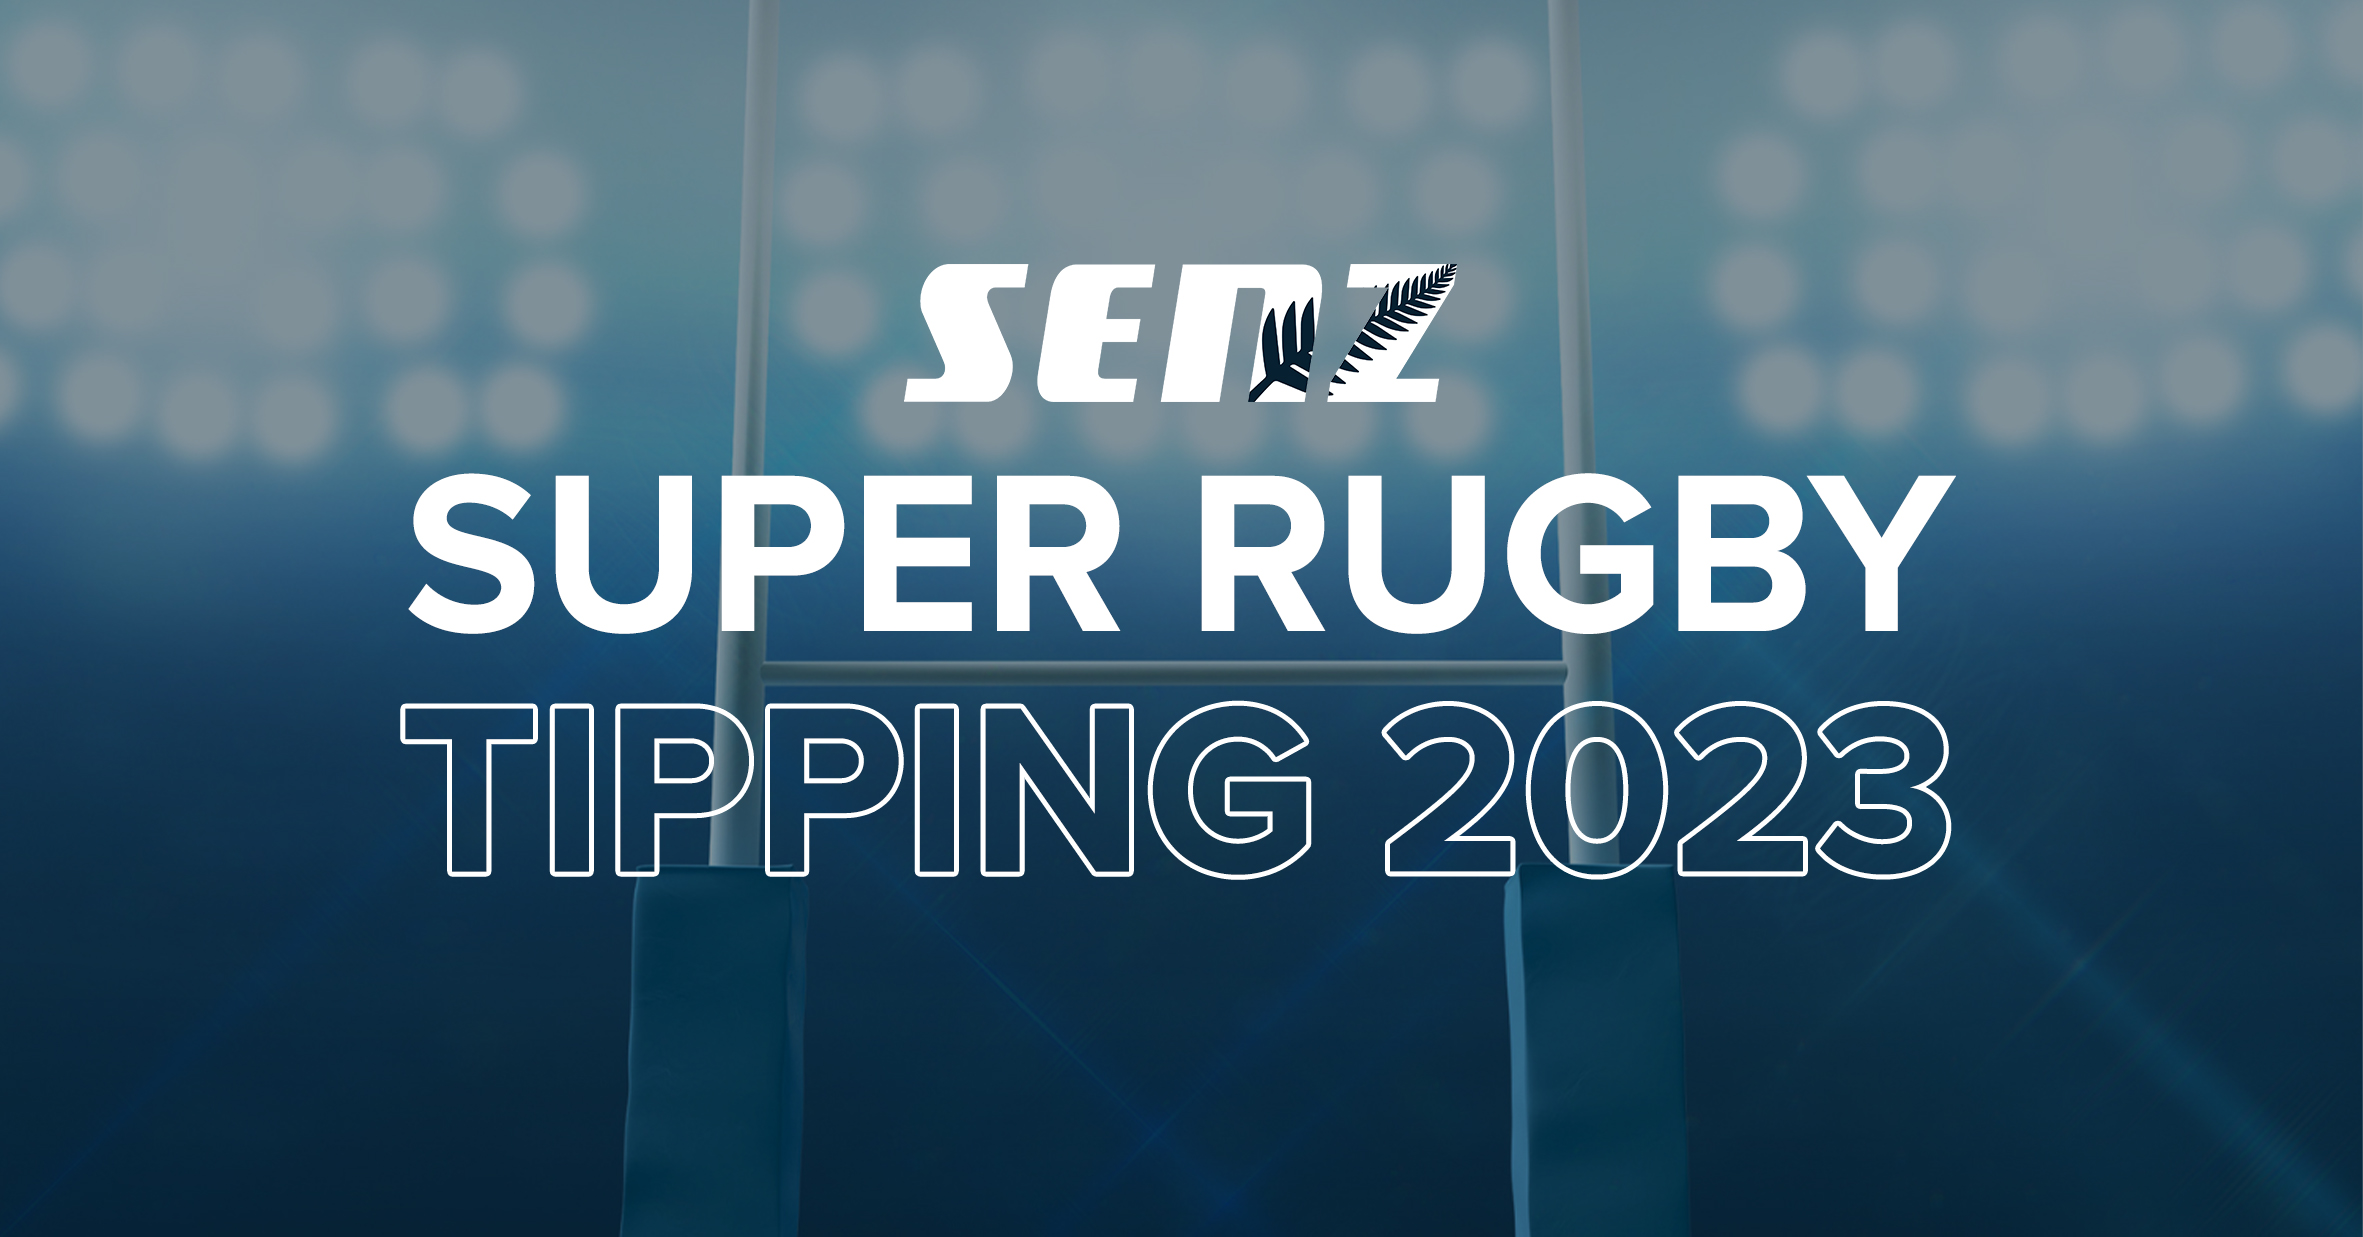 SENZ Super Rugby Tipping brought to you by Smith's City